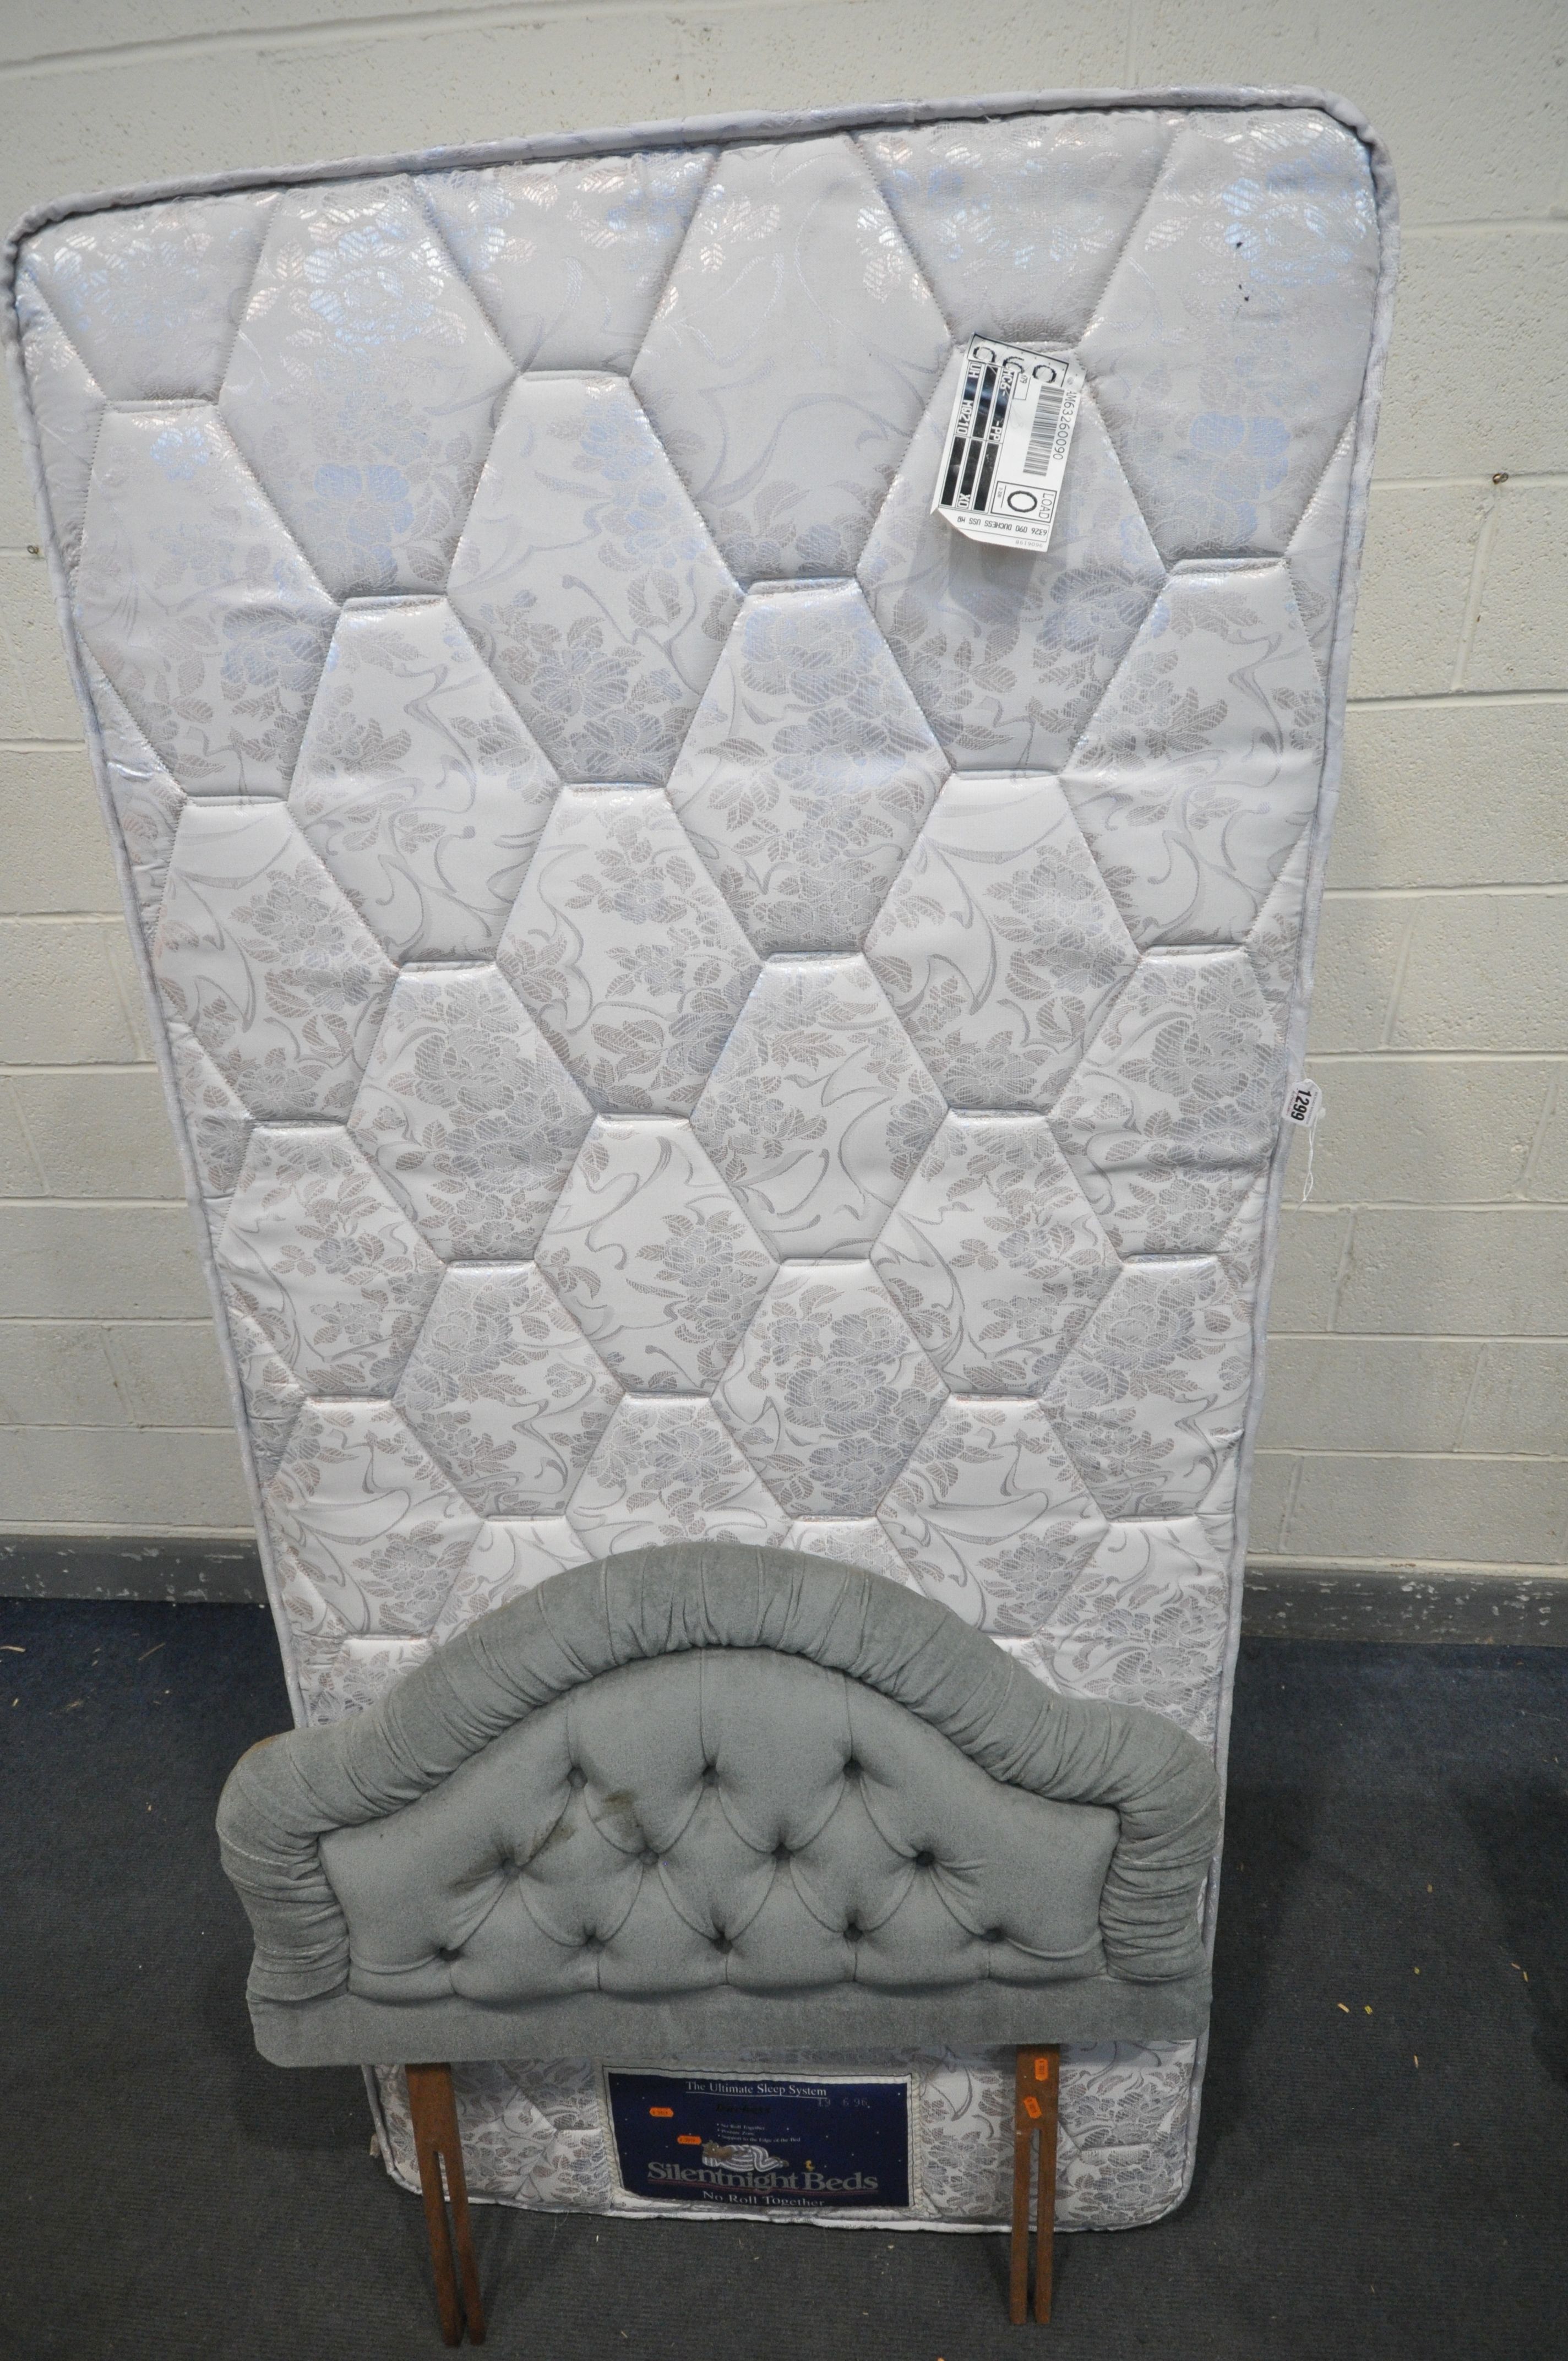 A SILENT NIGHT SINGLE DIVAN BED AND MATTRESS, with a grey headboard